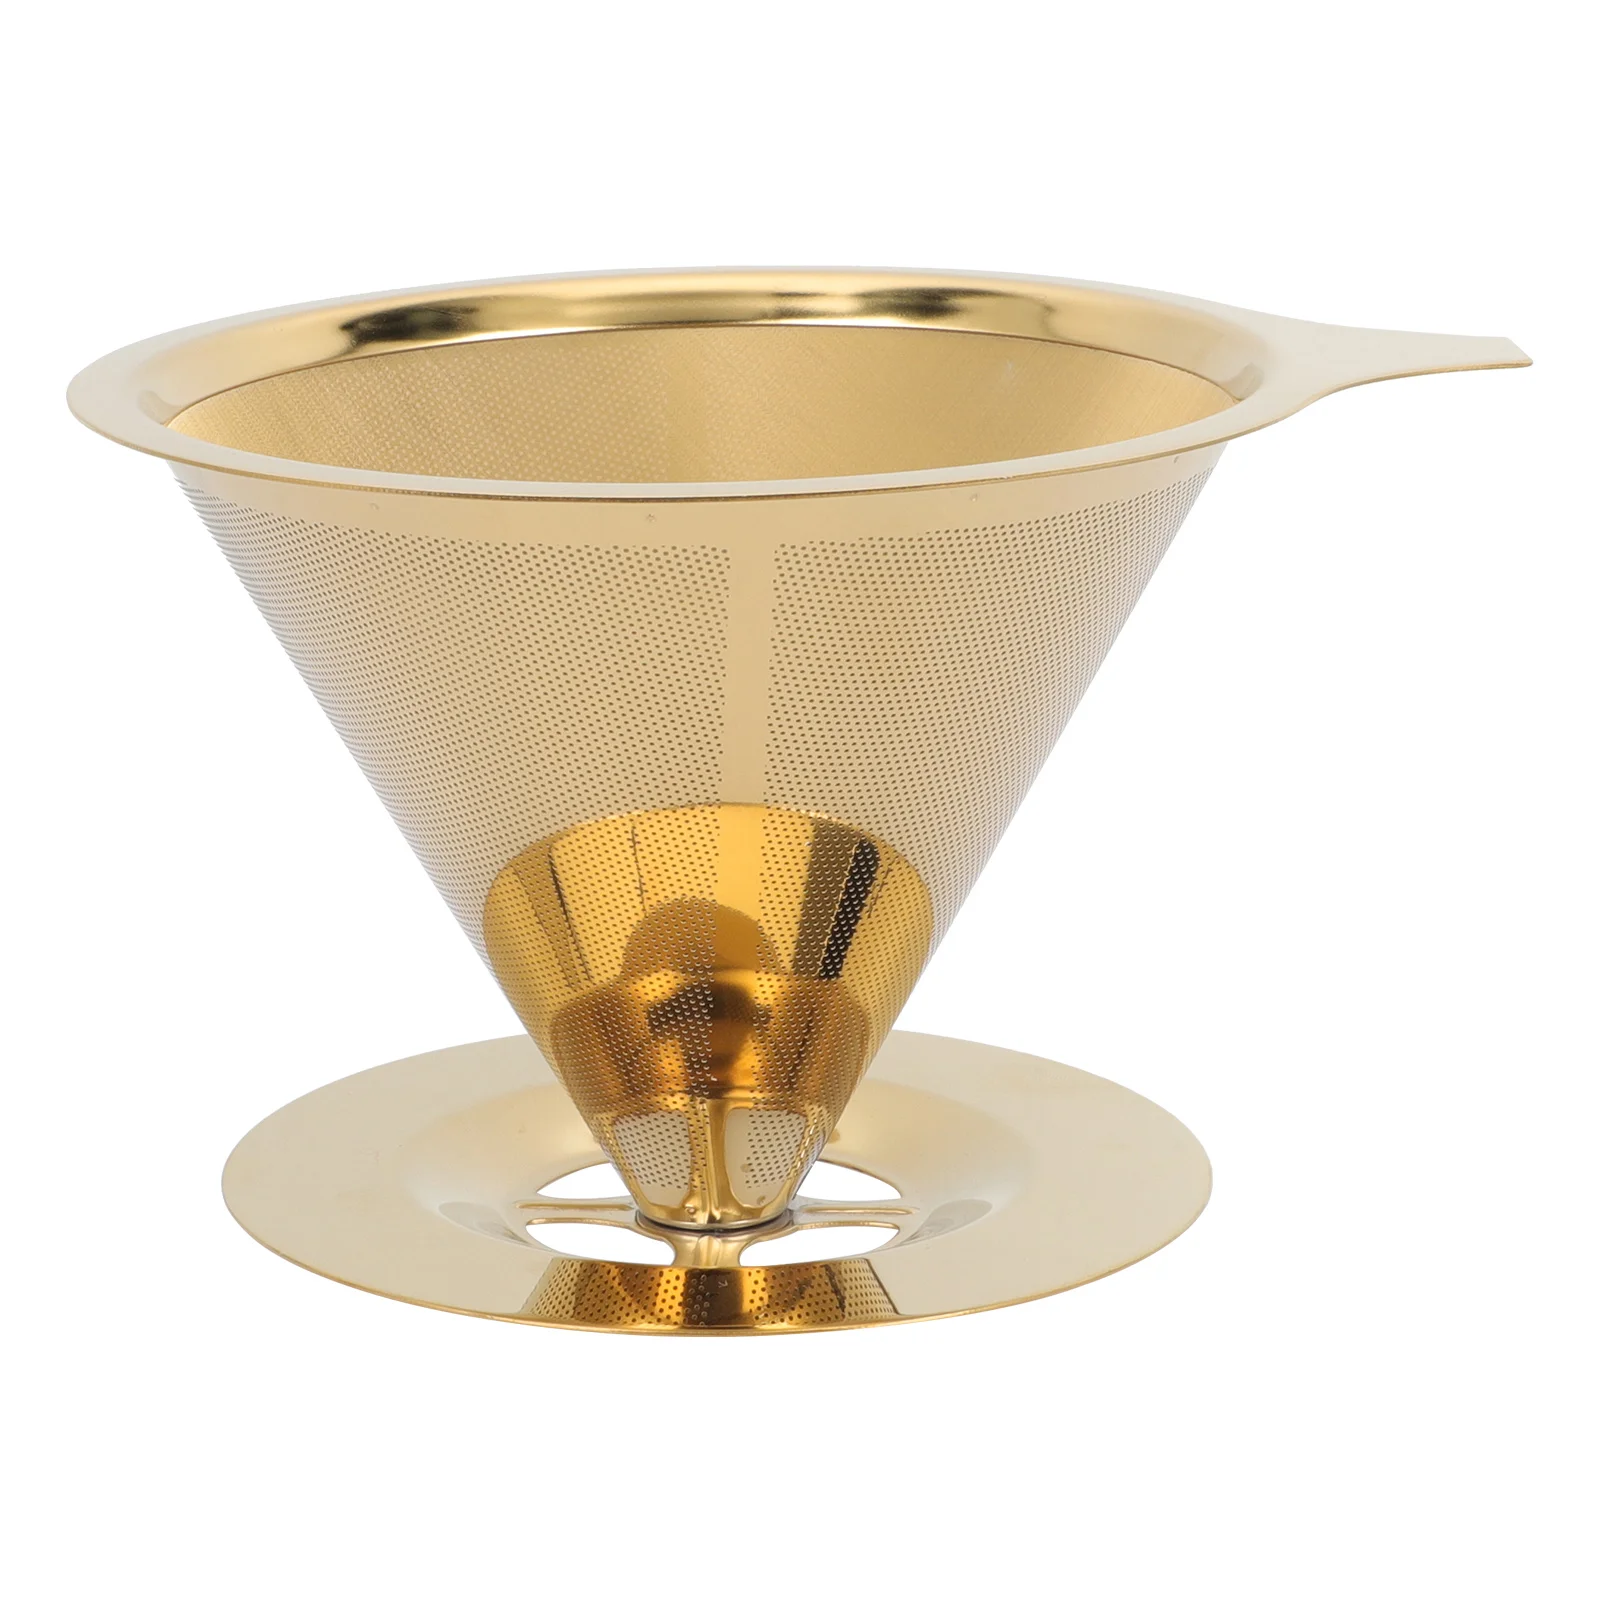 

Coffee Filter Cone Drip Maker Strainer Brewer Filters Over Pour Dripper Paperless Steel Stainless Stand Cup Hand Slow Pot